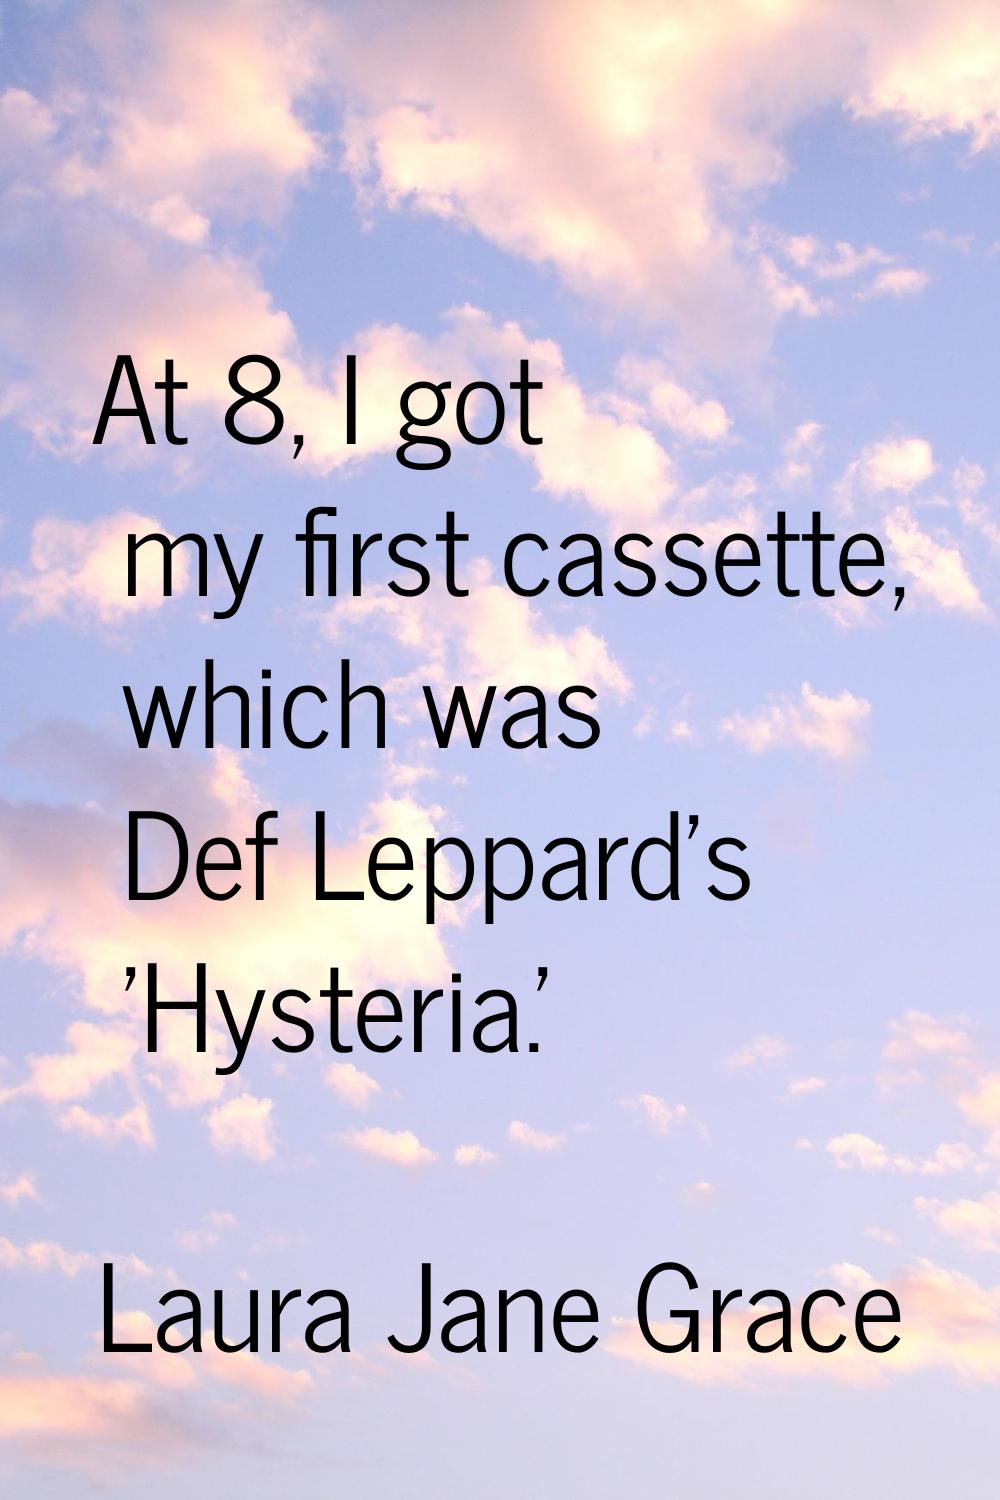 At 8, I got my first cassette, which was Def Leppard's 'Hysteria.'